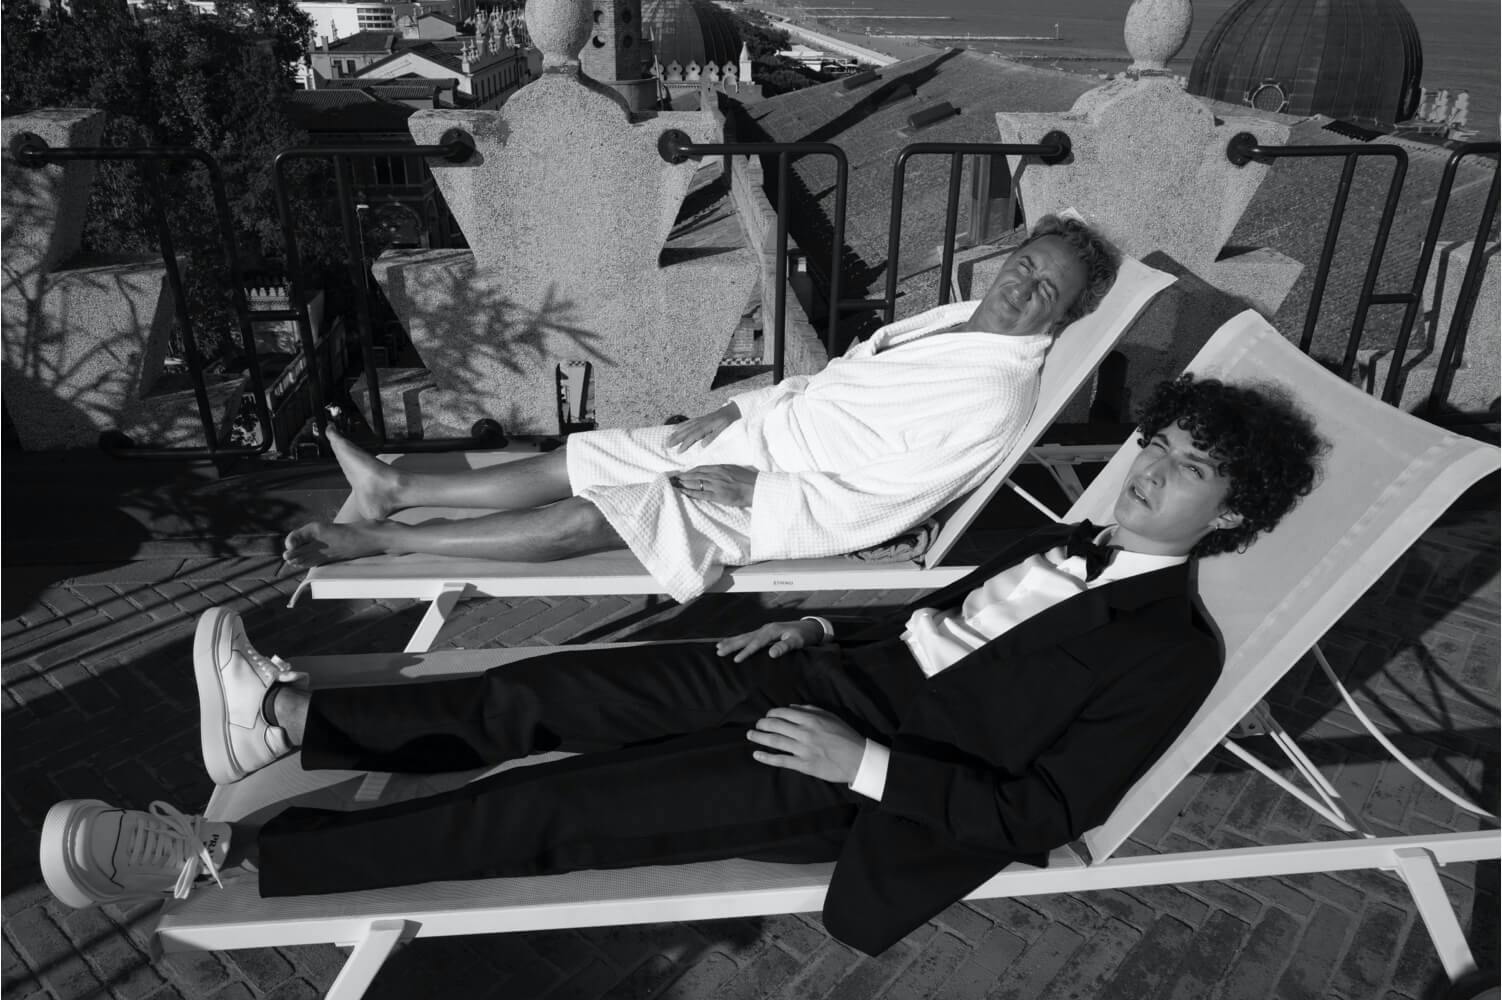 Paolo Sorretino and Filippo Scotti lounge on chaise lounges on a small porch. Sorrentino wears a robe, and Scotti wears a suit with sneakers.